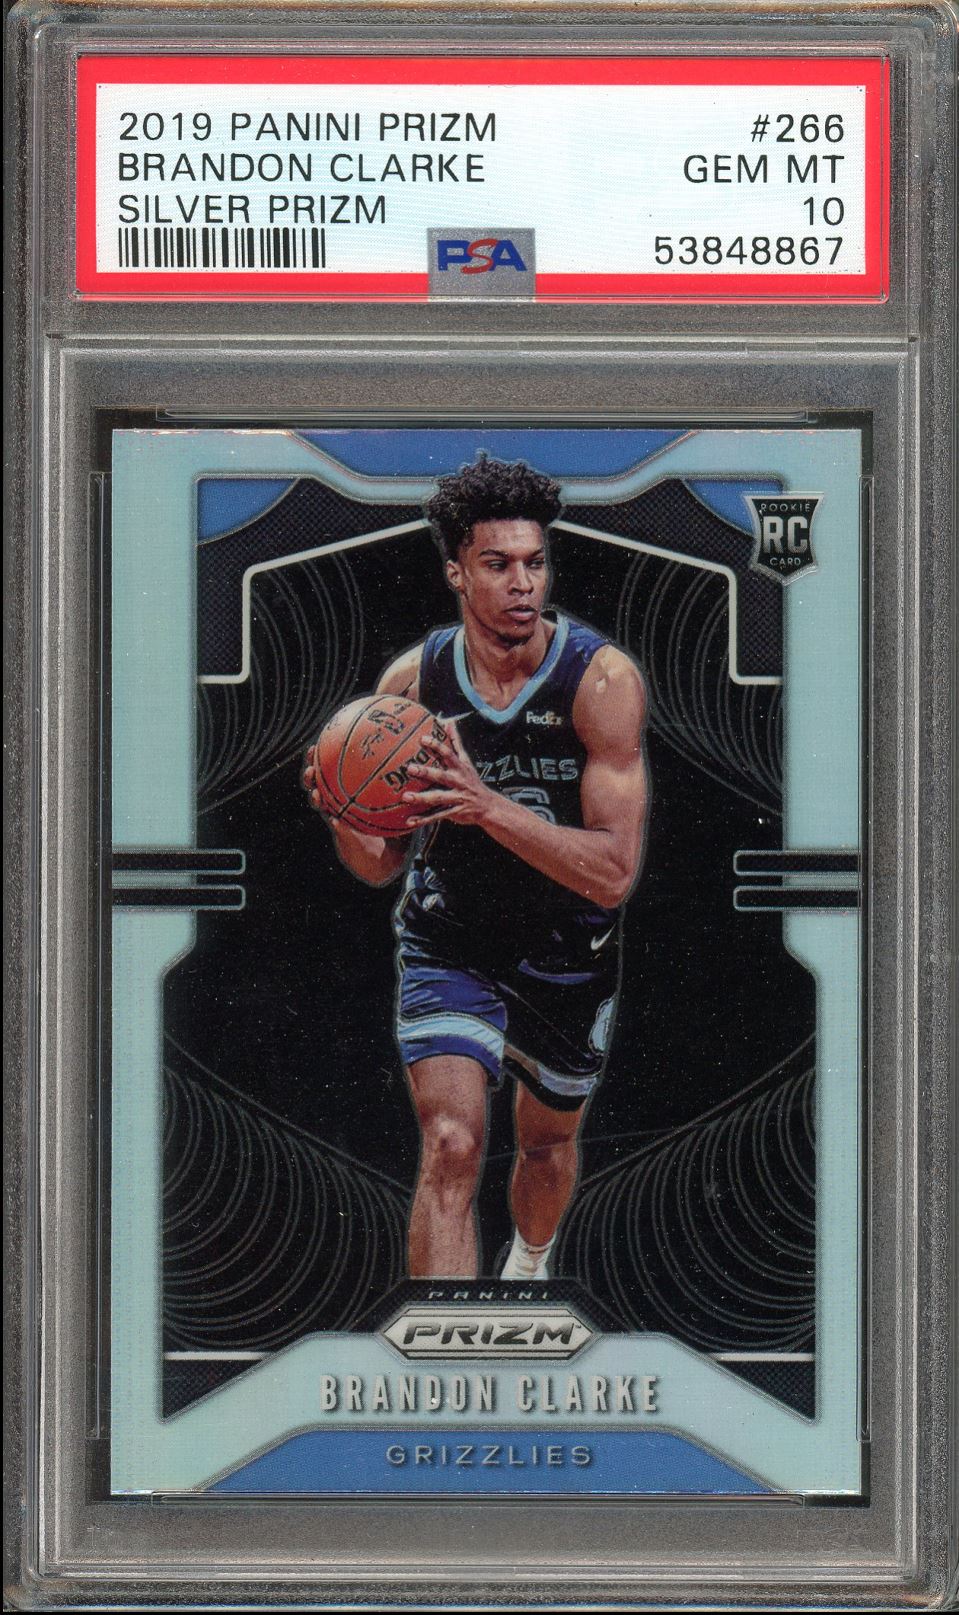 Brandon Clarke Trading Cards: Values, Tracking & Hot Deals